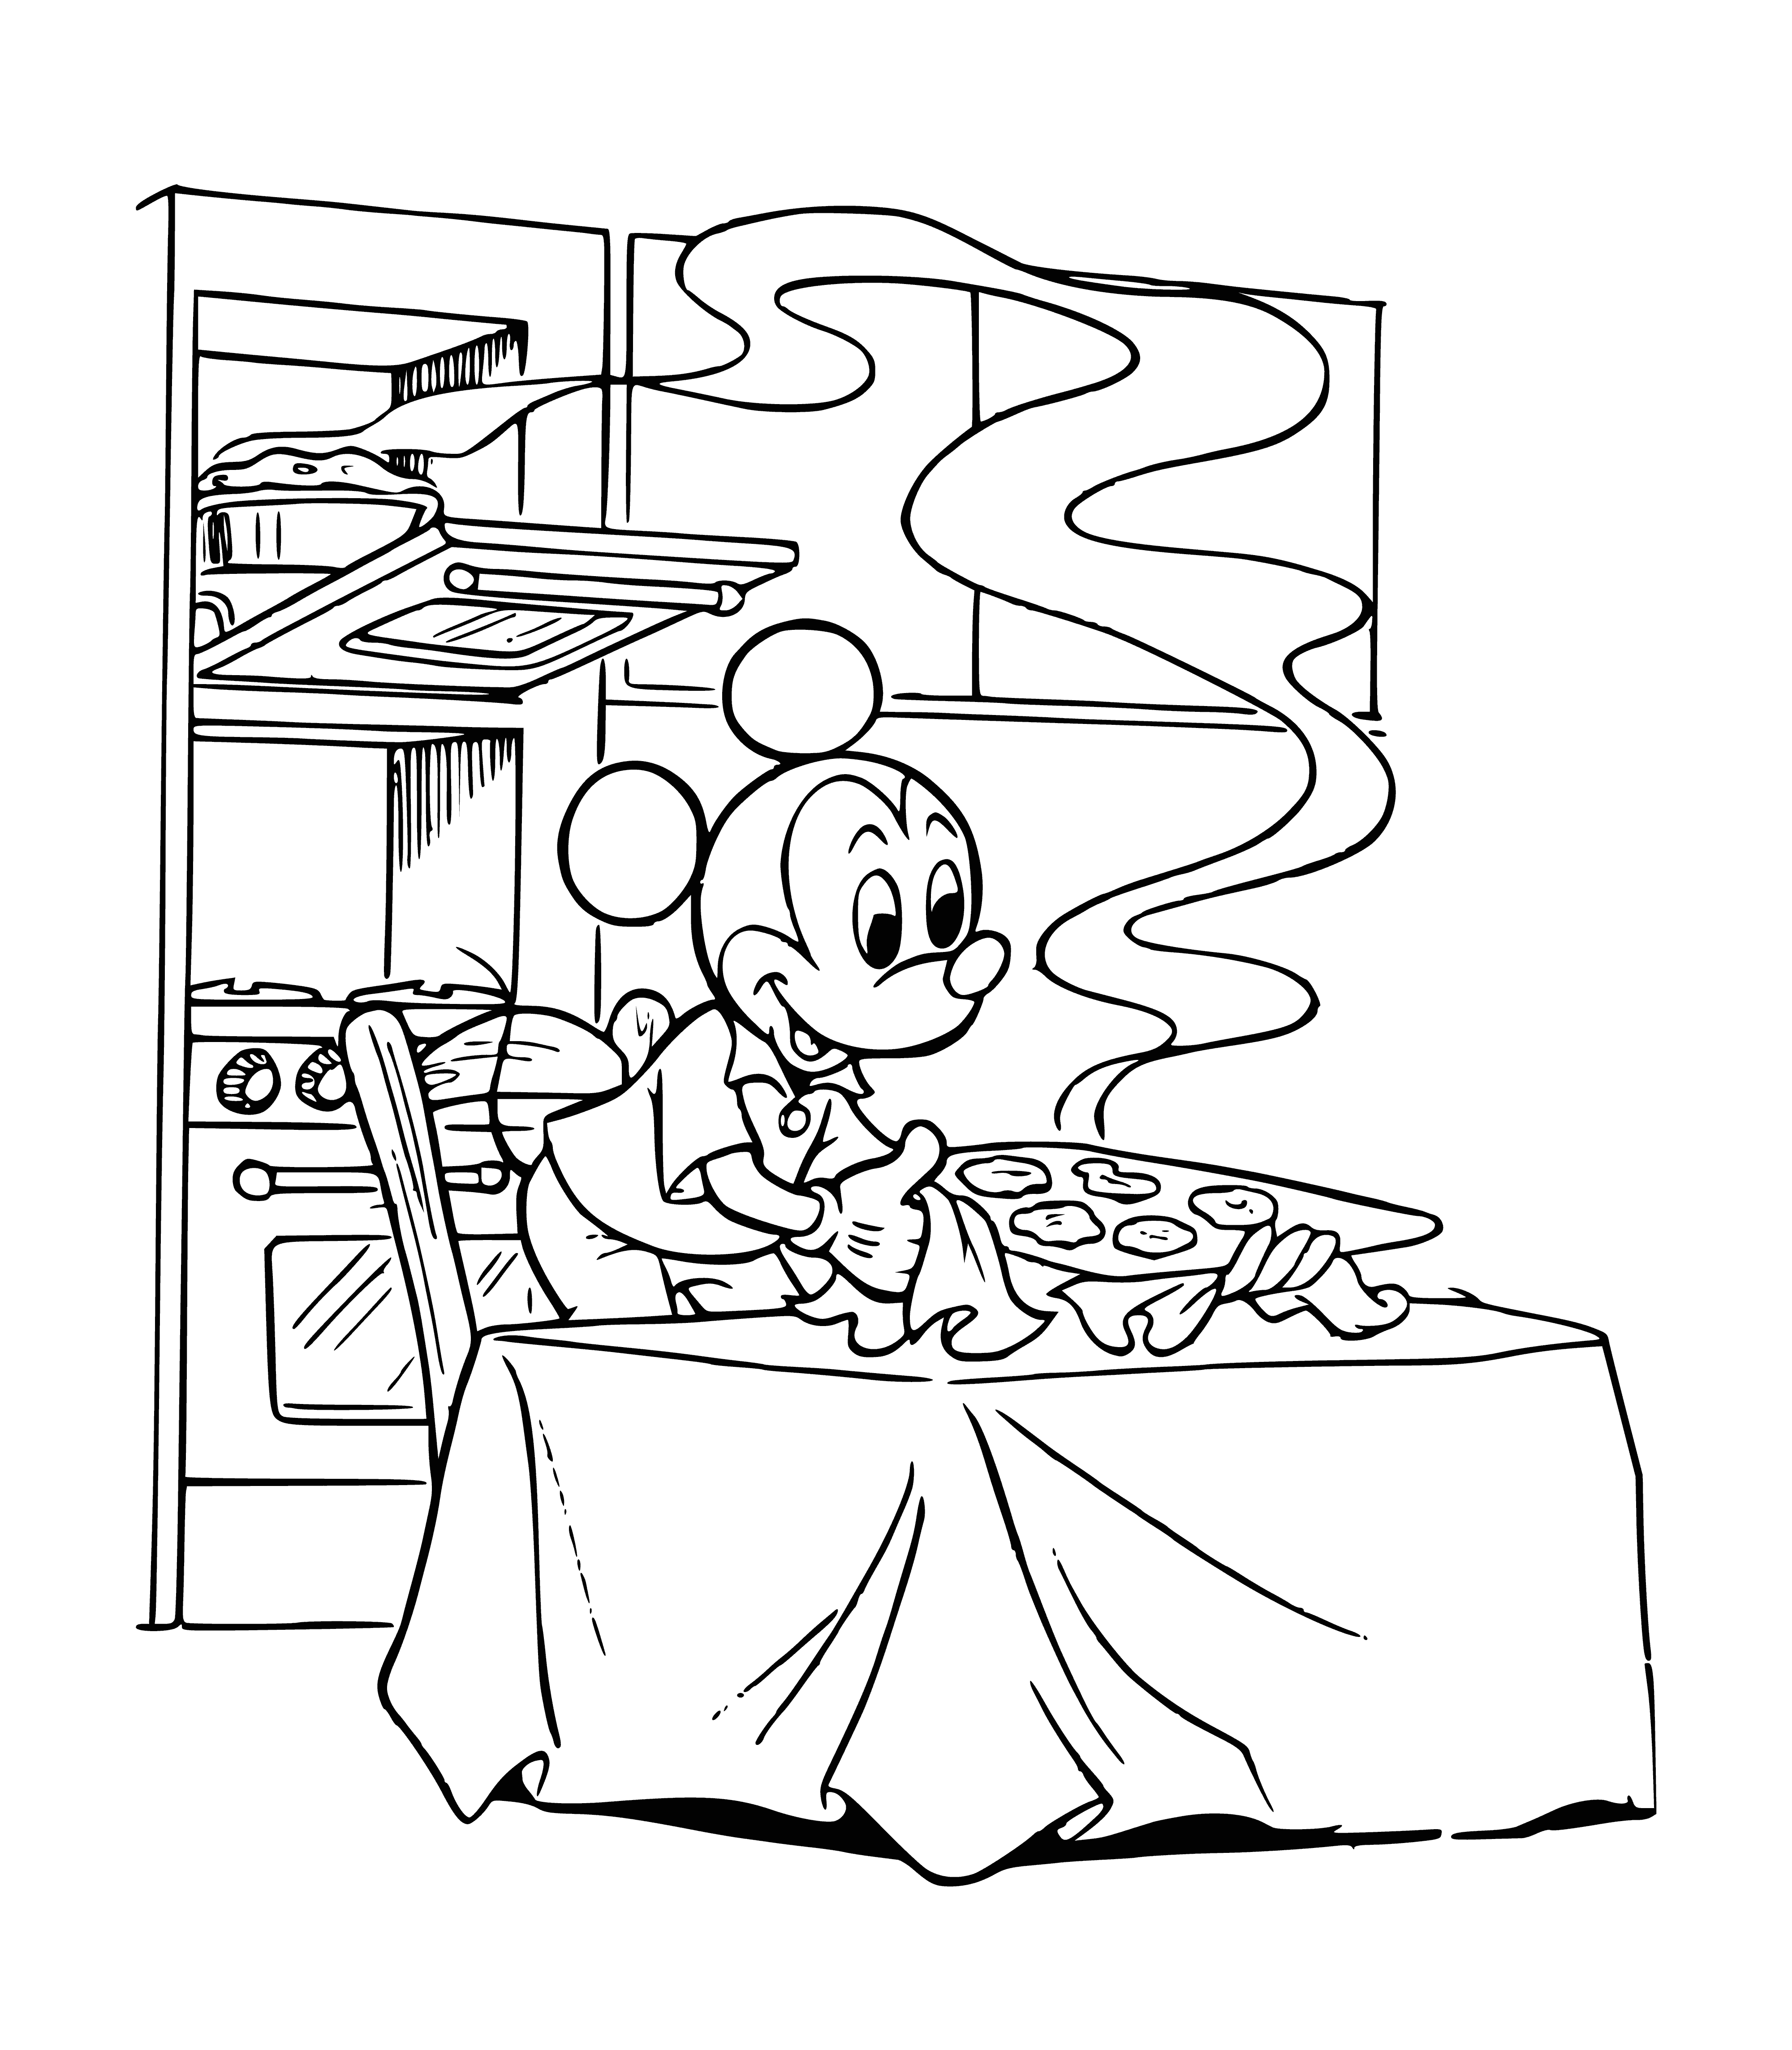 coloring page: Mouse stares longingly at delicious dish on the table.